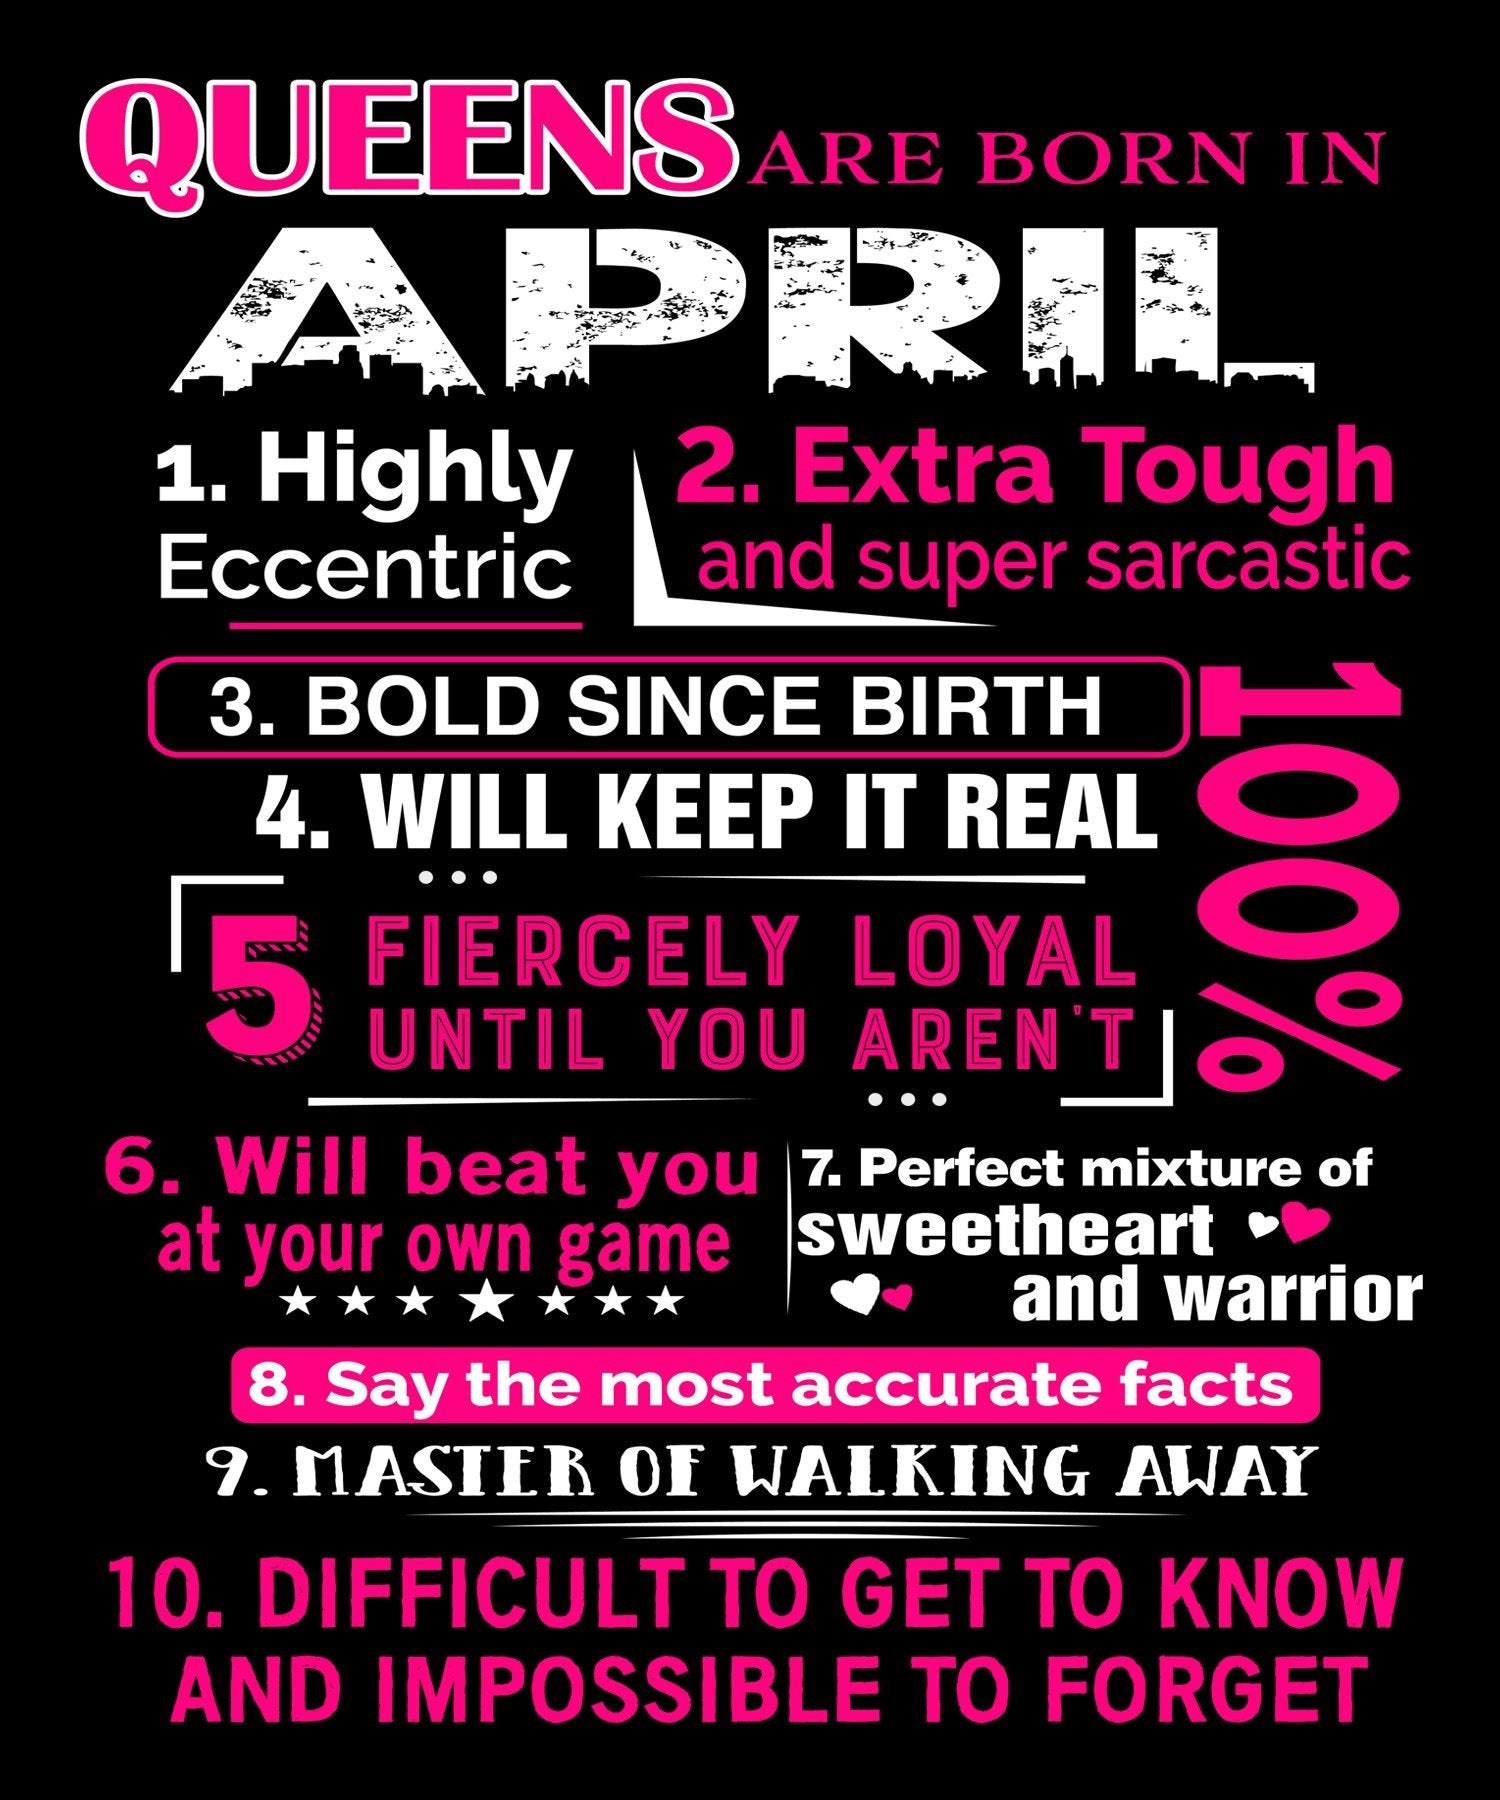 "Queens Are Born In April 10 Reasons"